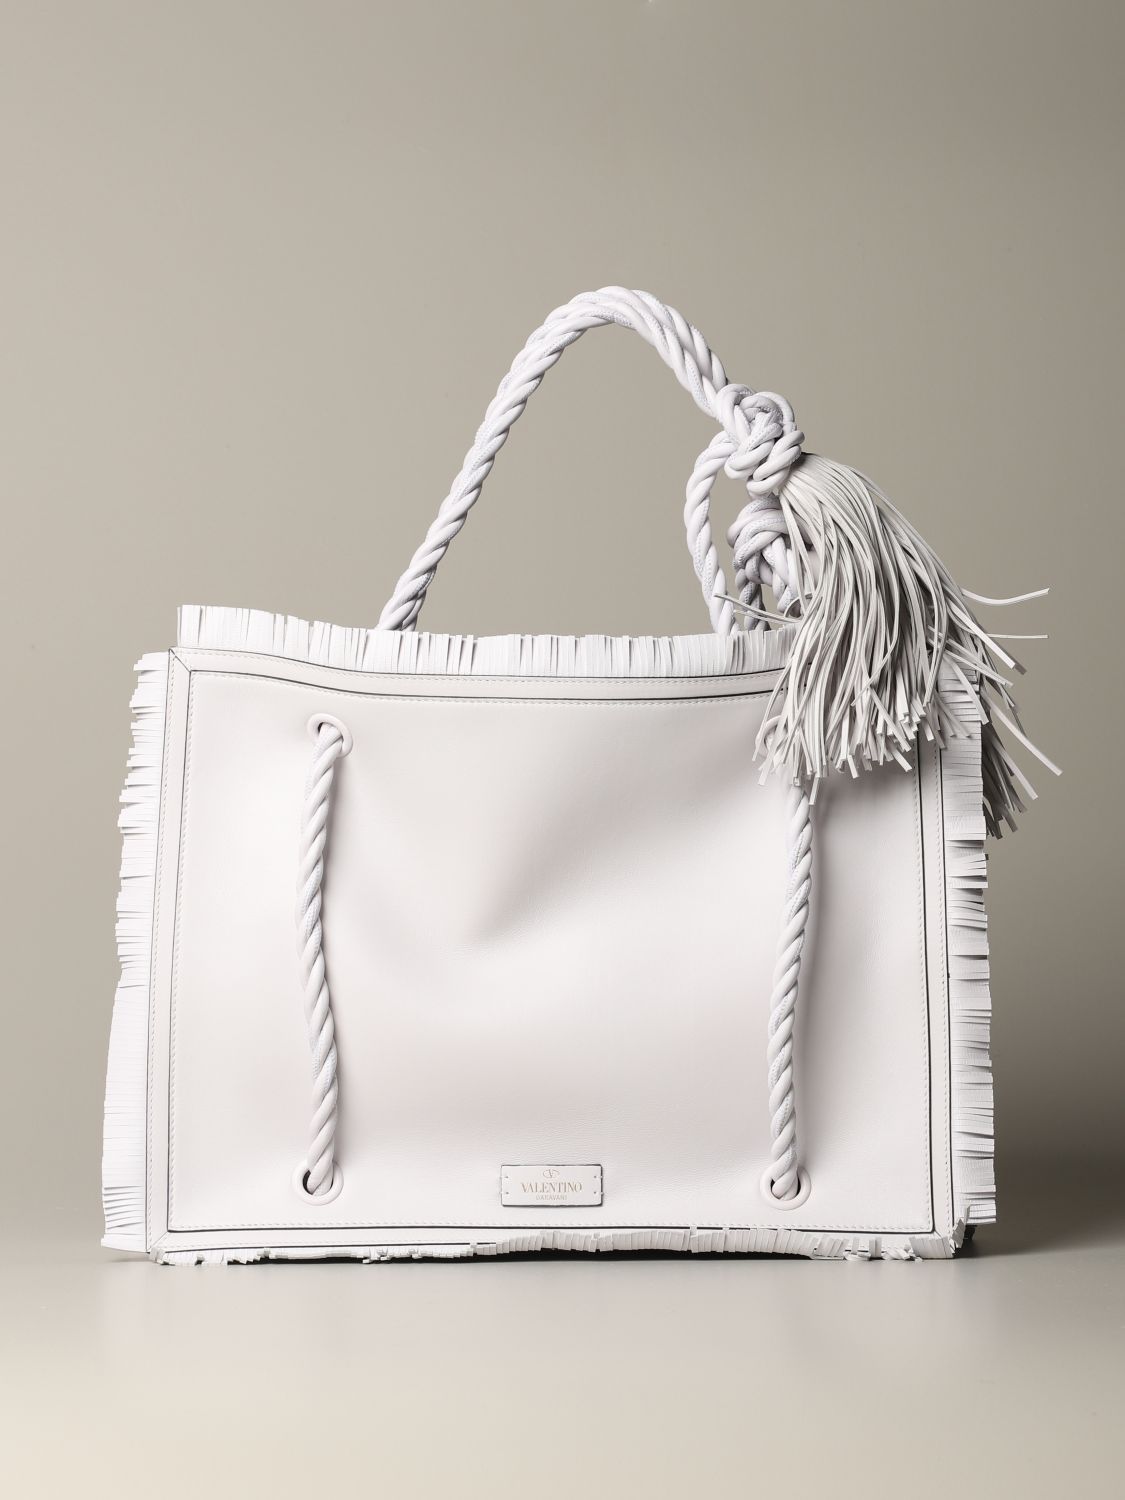 Wow ørn ånd Valentino Garavani Outlet: The rop shopping bag in leather with fringes |  Tote Bags Valentino Garavani Women White | Tote Bags Valentino Garavani  TW0B0G72 JMS GIGLIO.COM